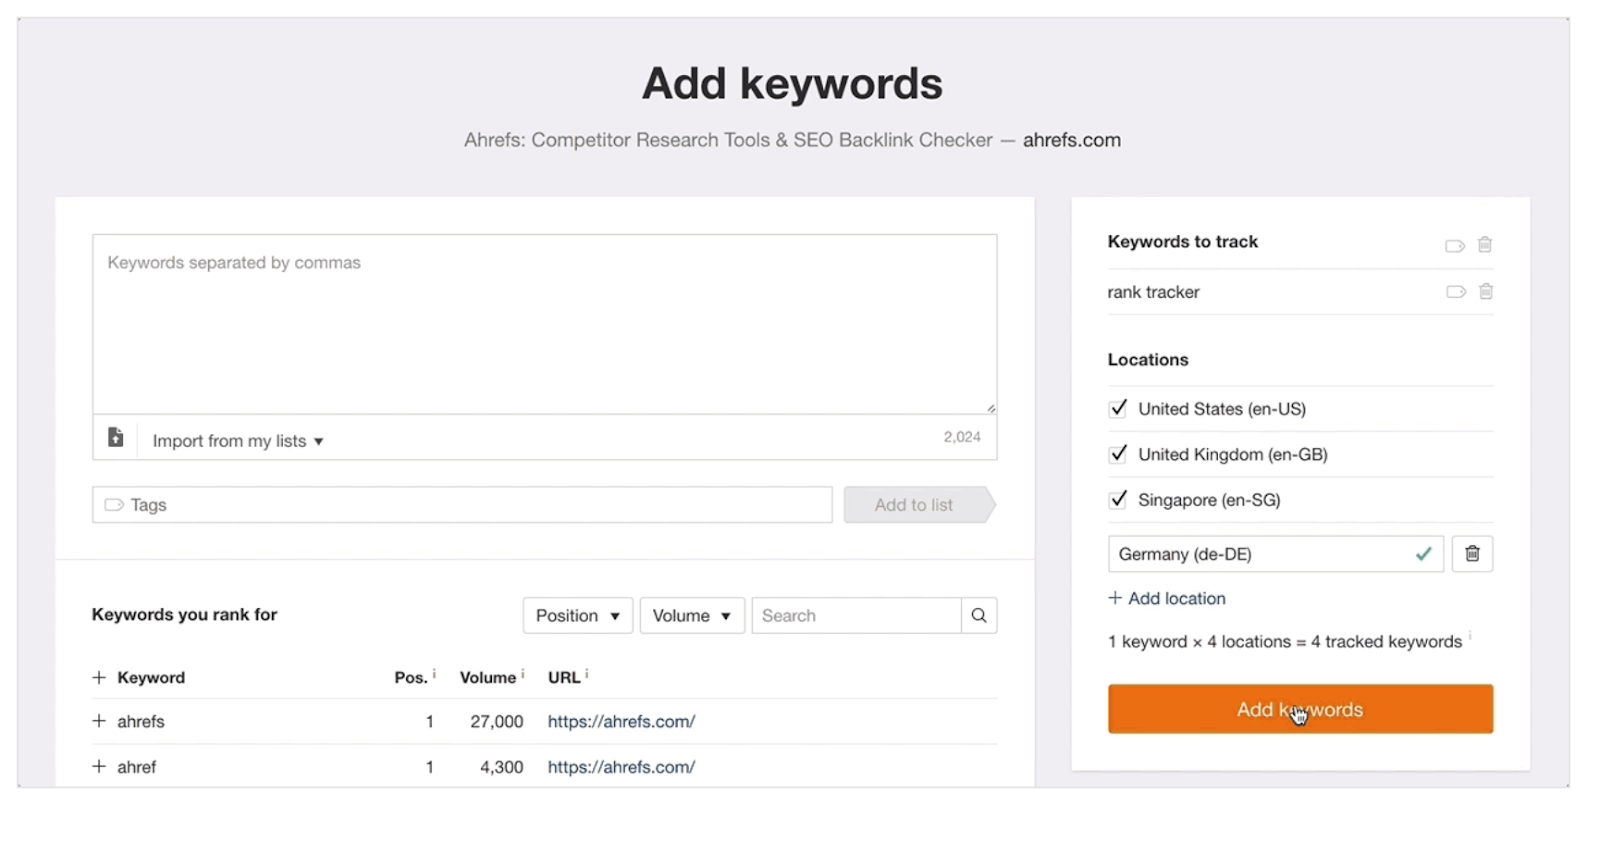 A screen cap of Ahref's website, which shows how the Rank Tracker works. It shows that you can add keywords and have them tracked for their performance.